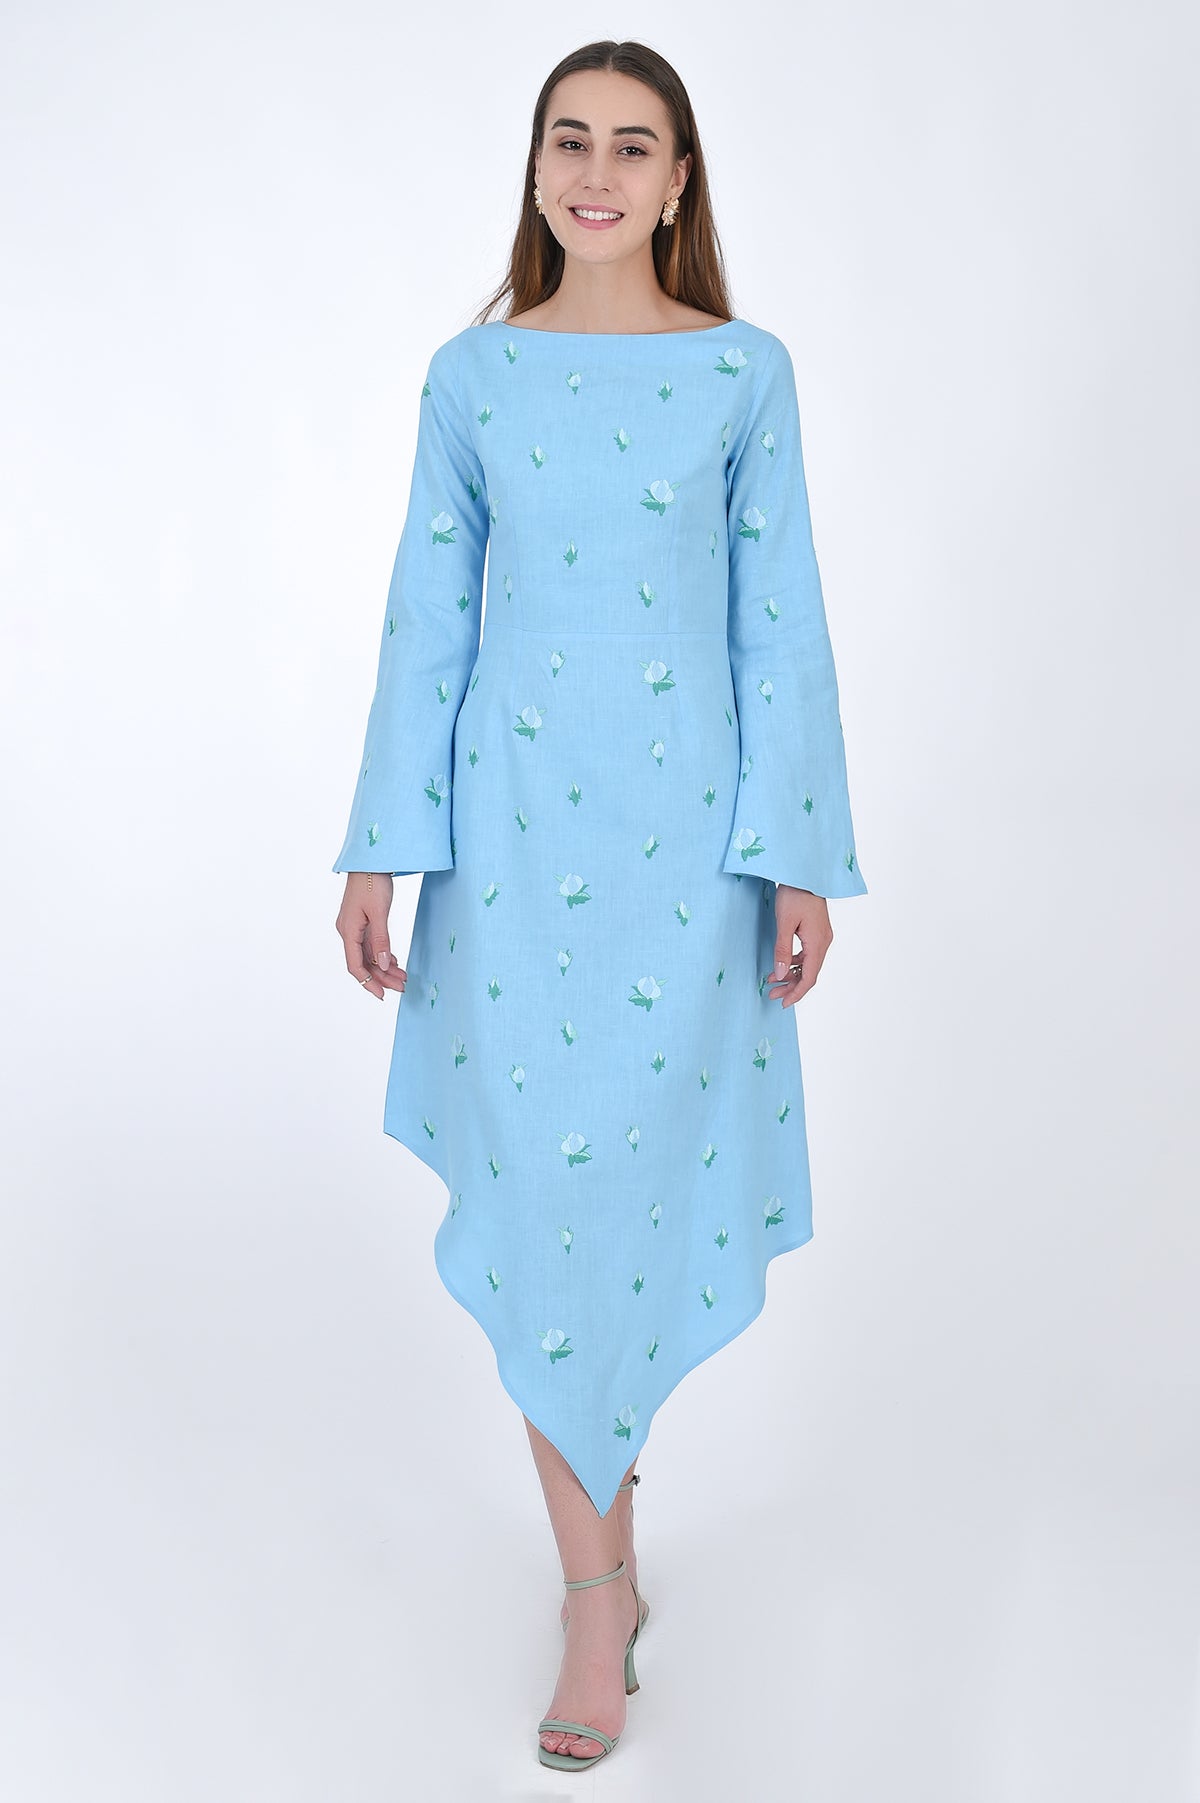 Fanm Mon Choupet Asymmetrical Linen dress, front view.  Features long bell sleeves,  a boat neckline and hits mid length. Detailed with intricate floral-inspired embroidery a Fanm Mon signature. 